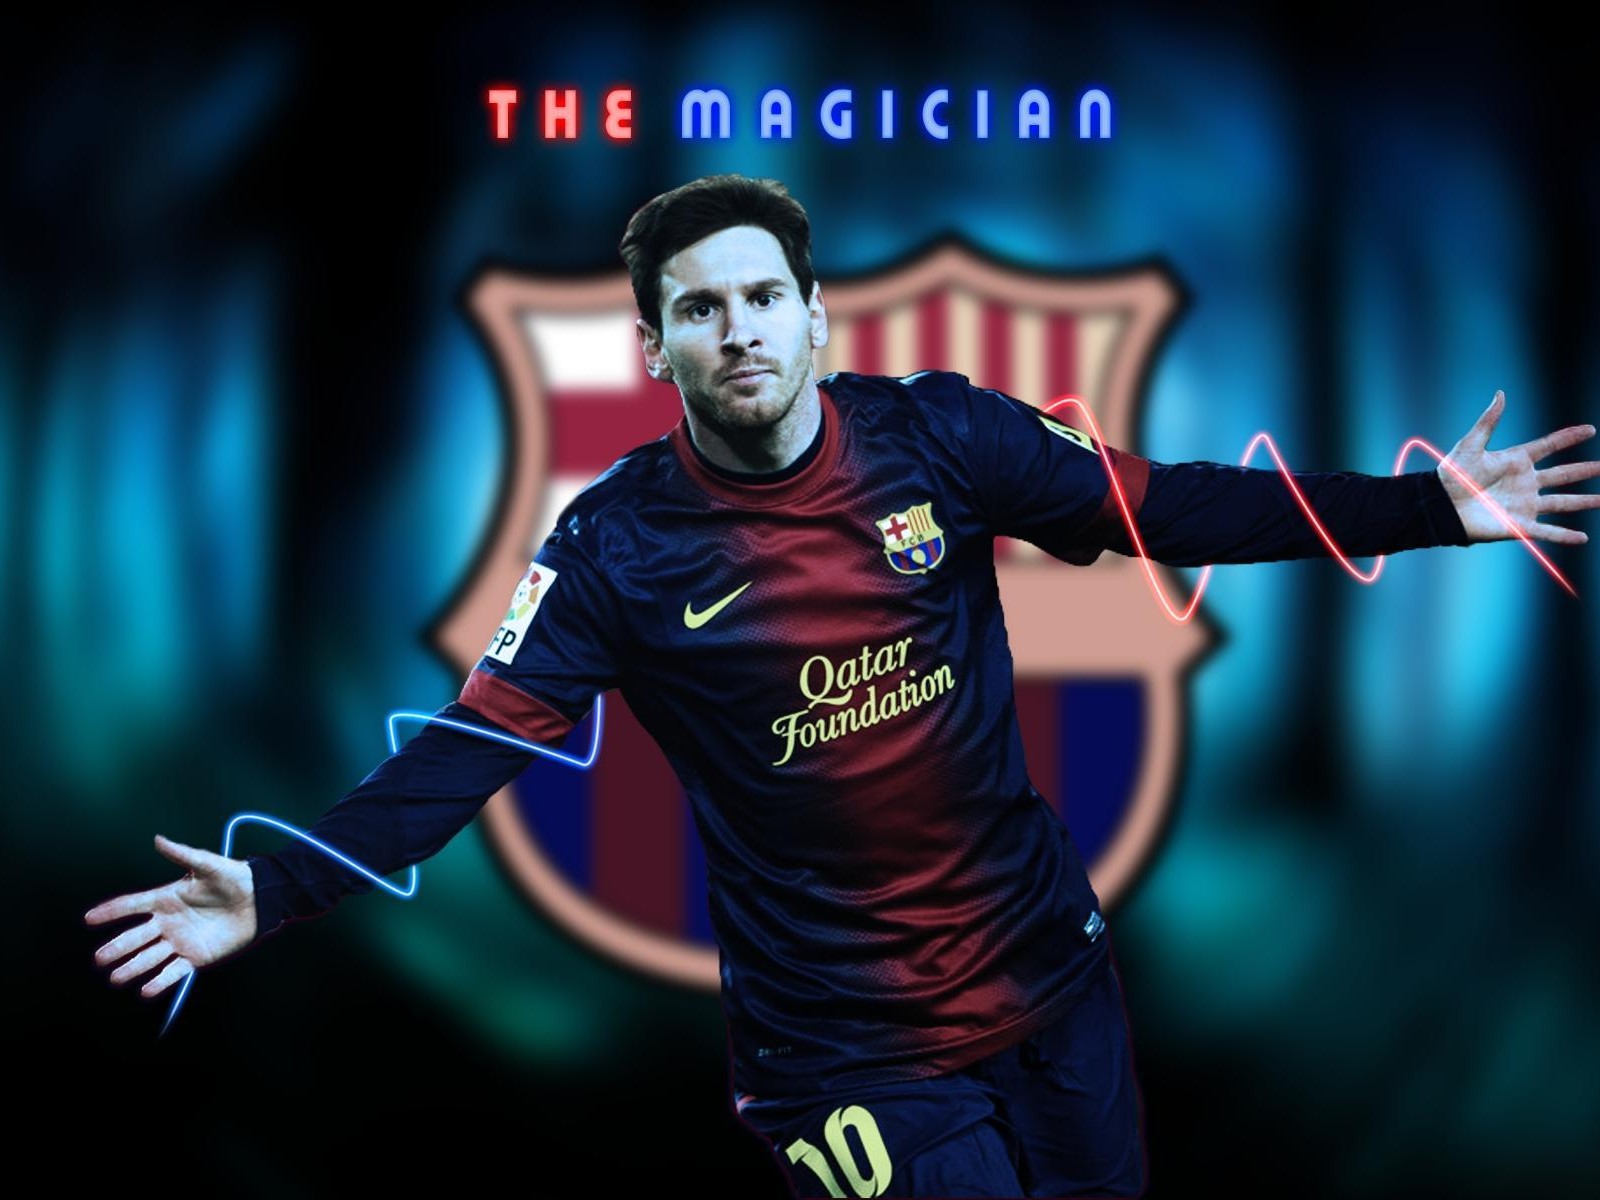 wallpaper do messi,football player,product,player,soccer player,jersey